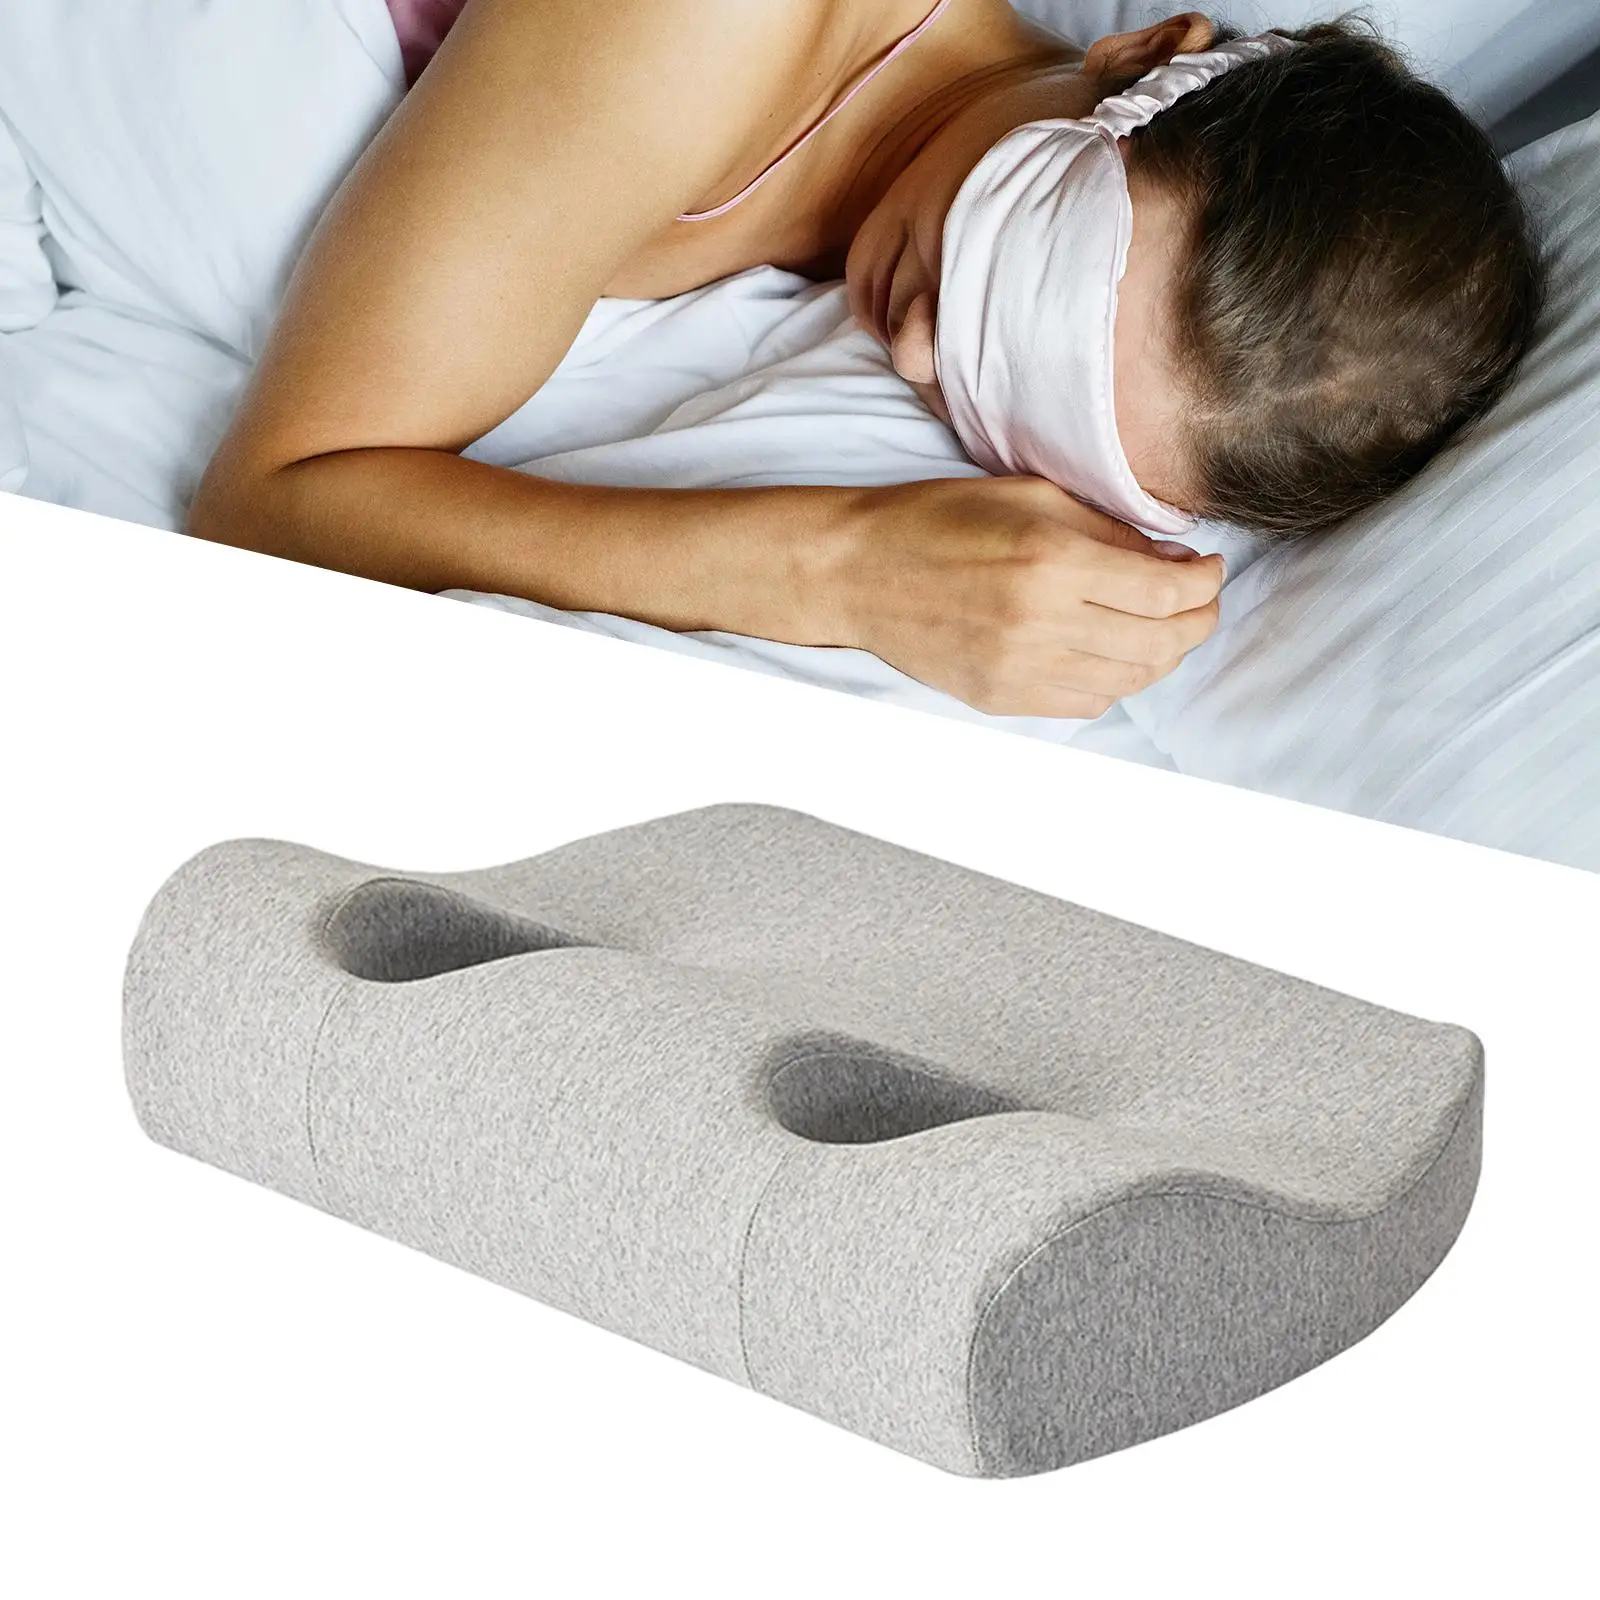 Ear Pillows with Hole Sleeping Pillow for Earplugs Earbuds Stomach Sleeping